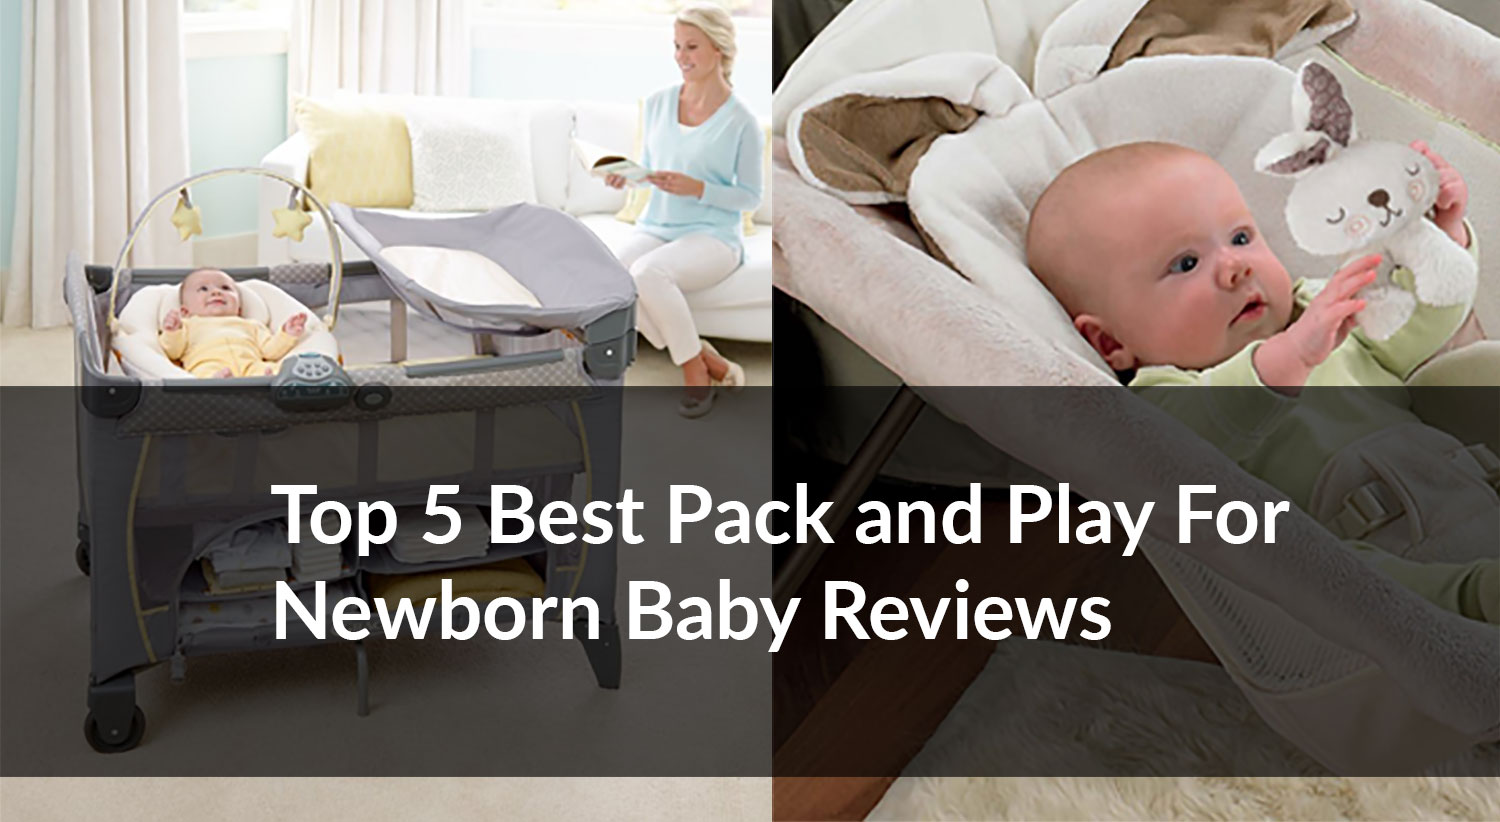 Best Pack and Play for Newborn Baby